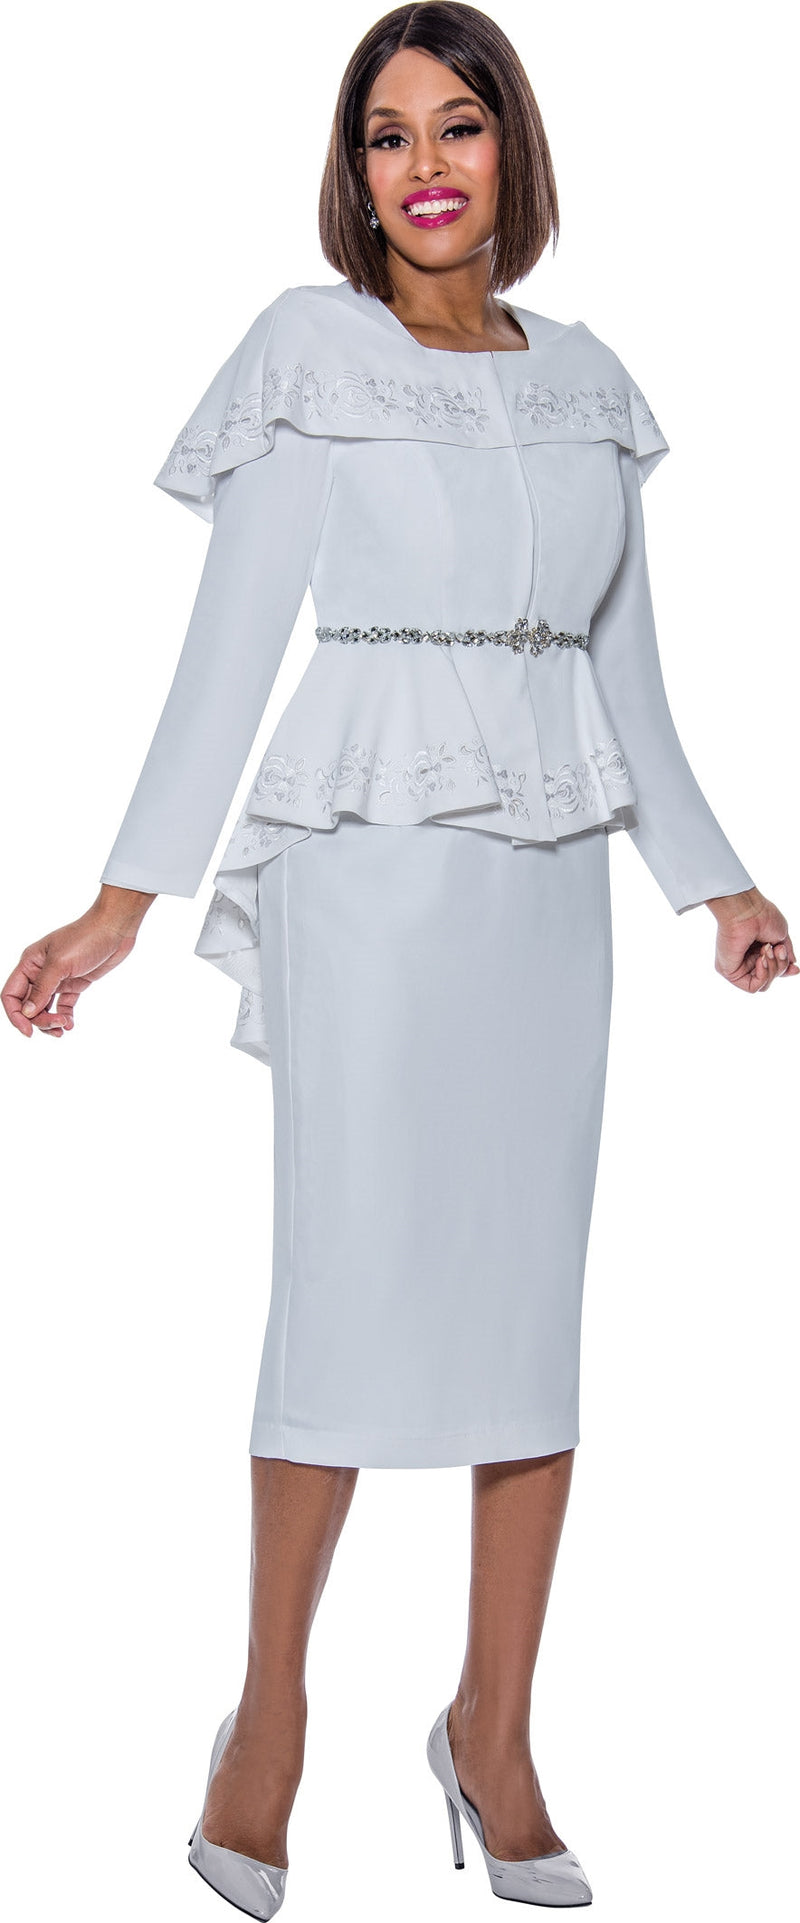 Divine Queen Skirt Suit 2162-White - Church Suits For Less